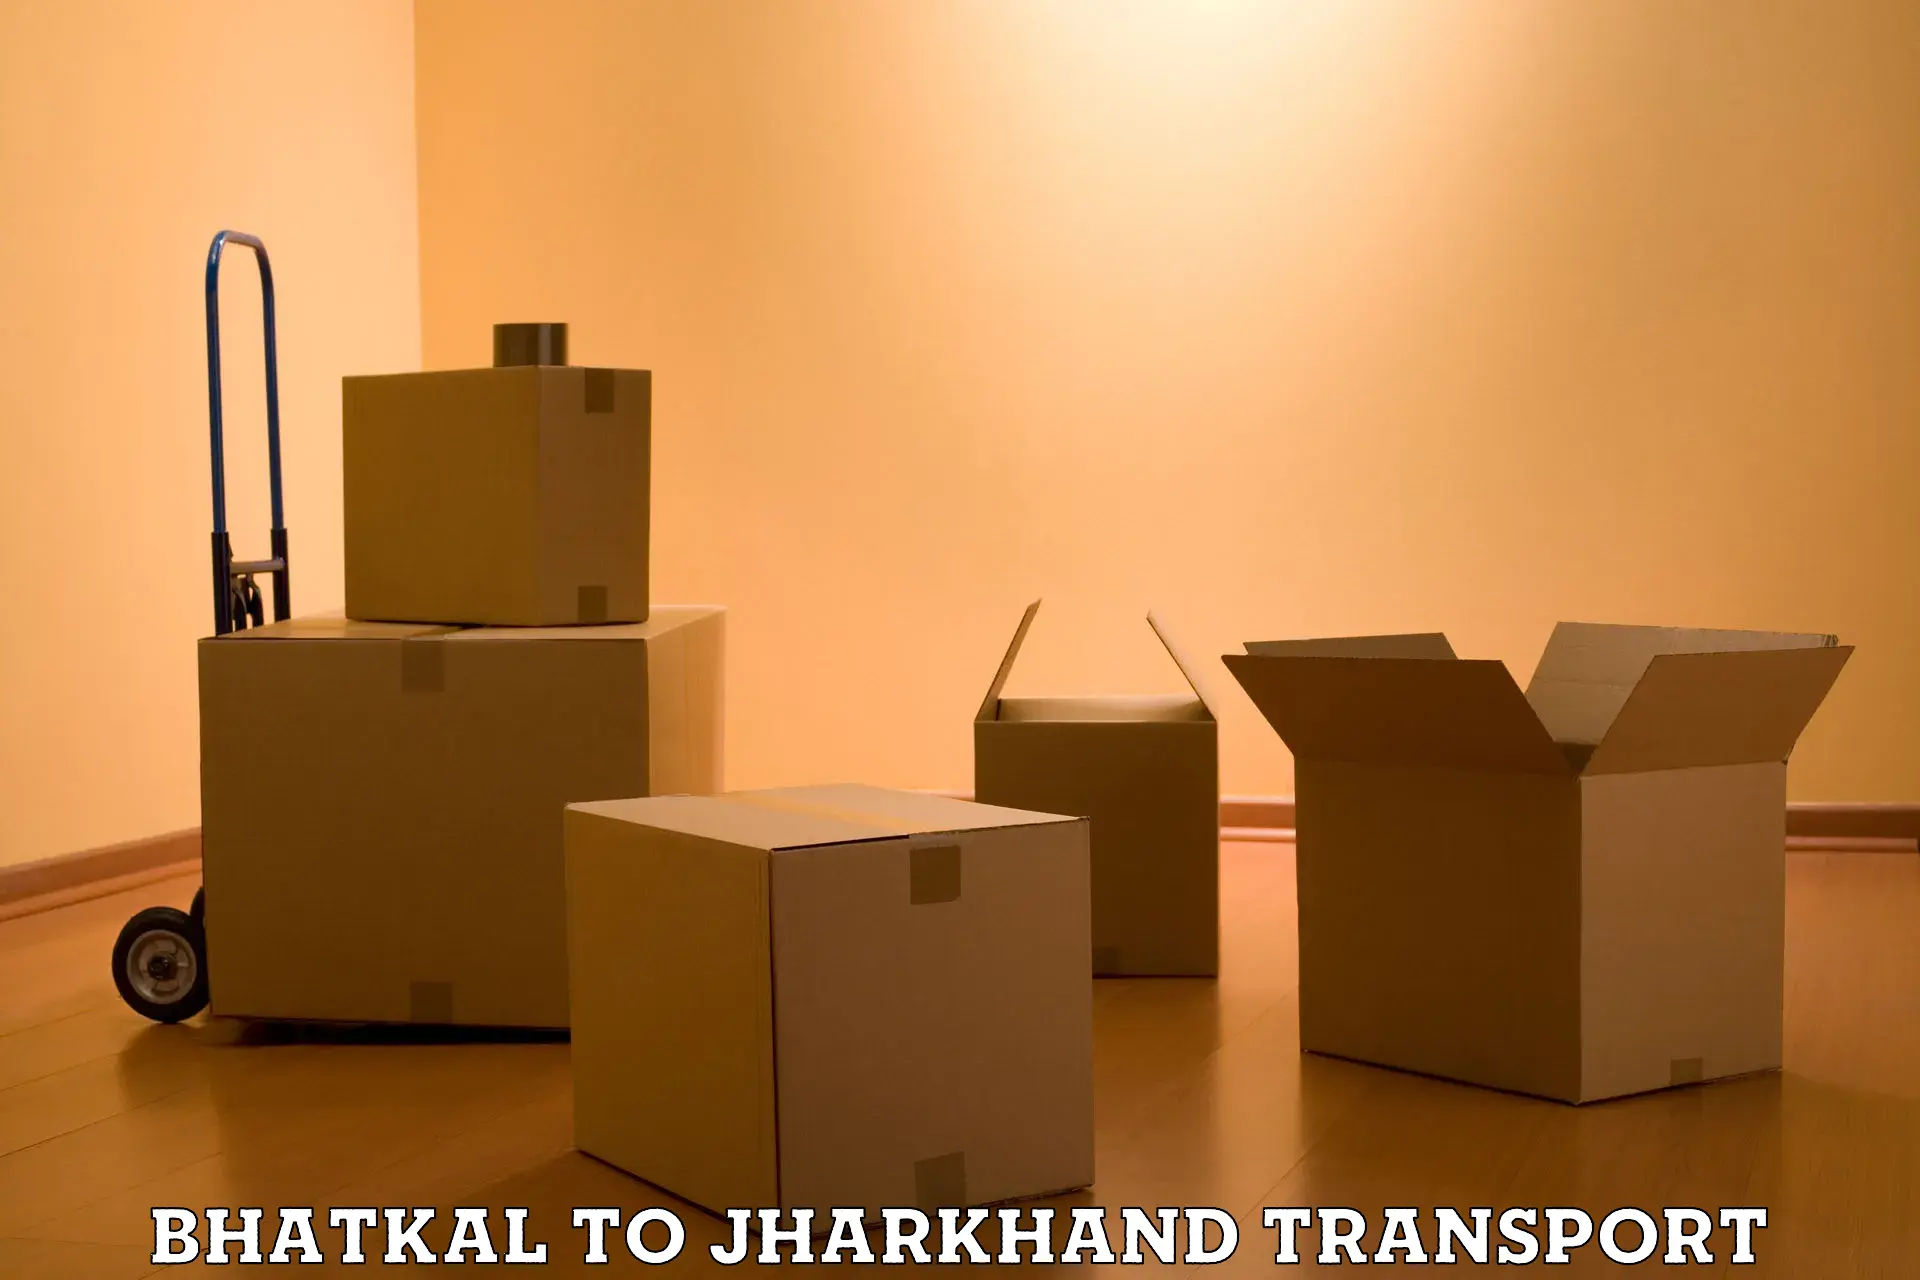 Truck transport companies in India Bhatkal to Isri